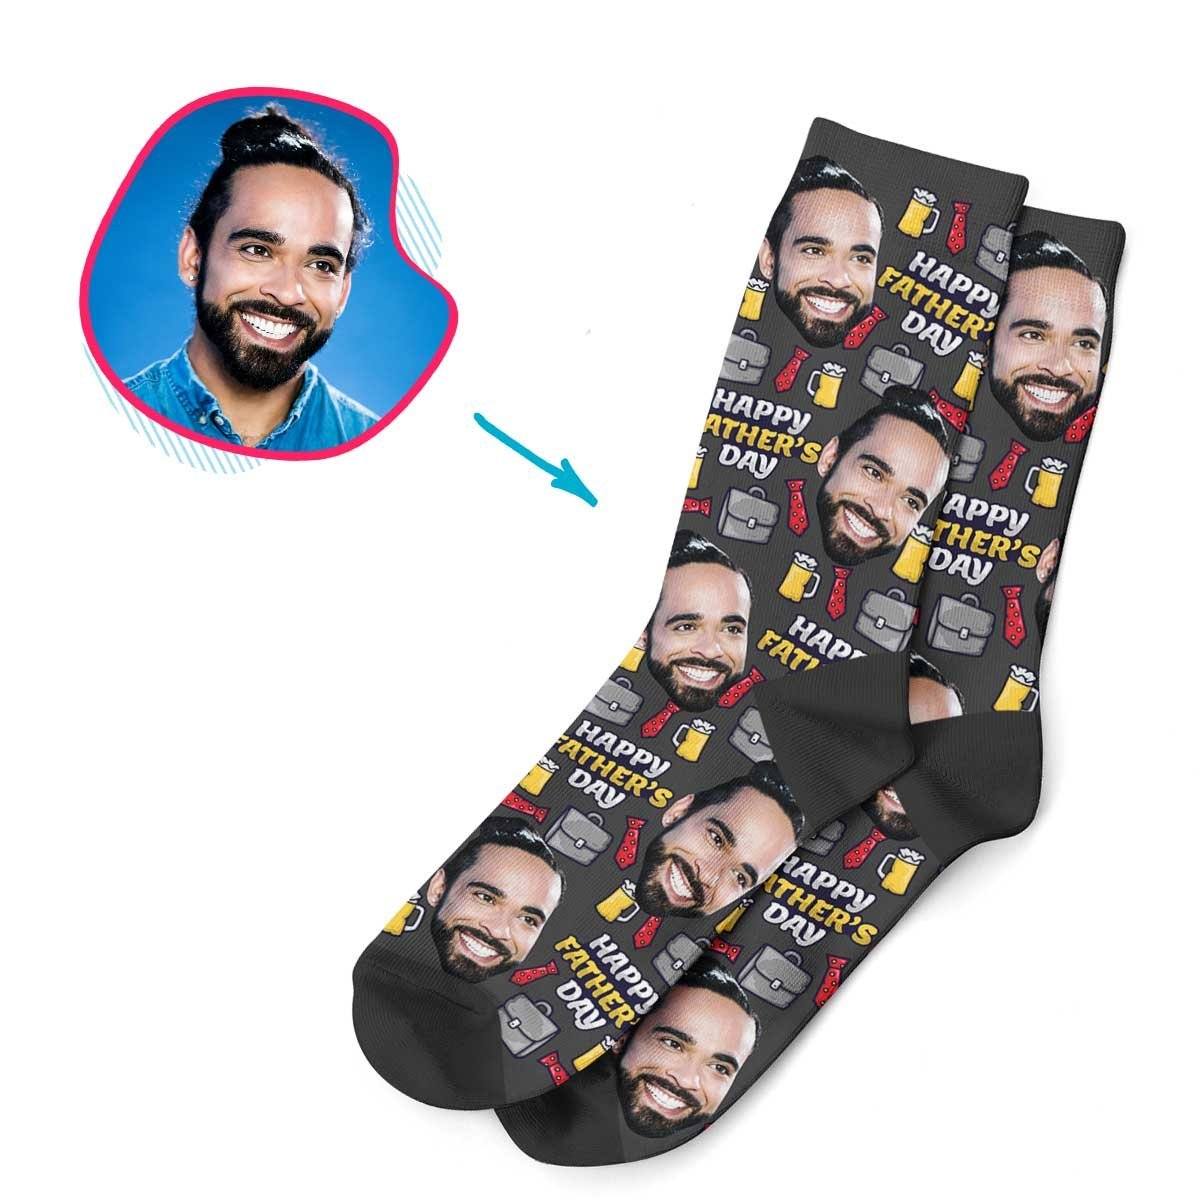 Dark Fathers Day personalized socks with photo of face printed on them